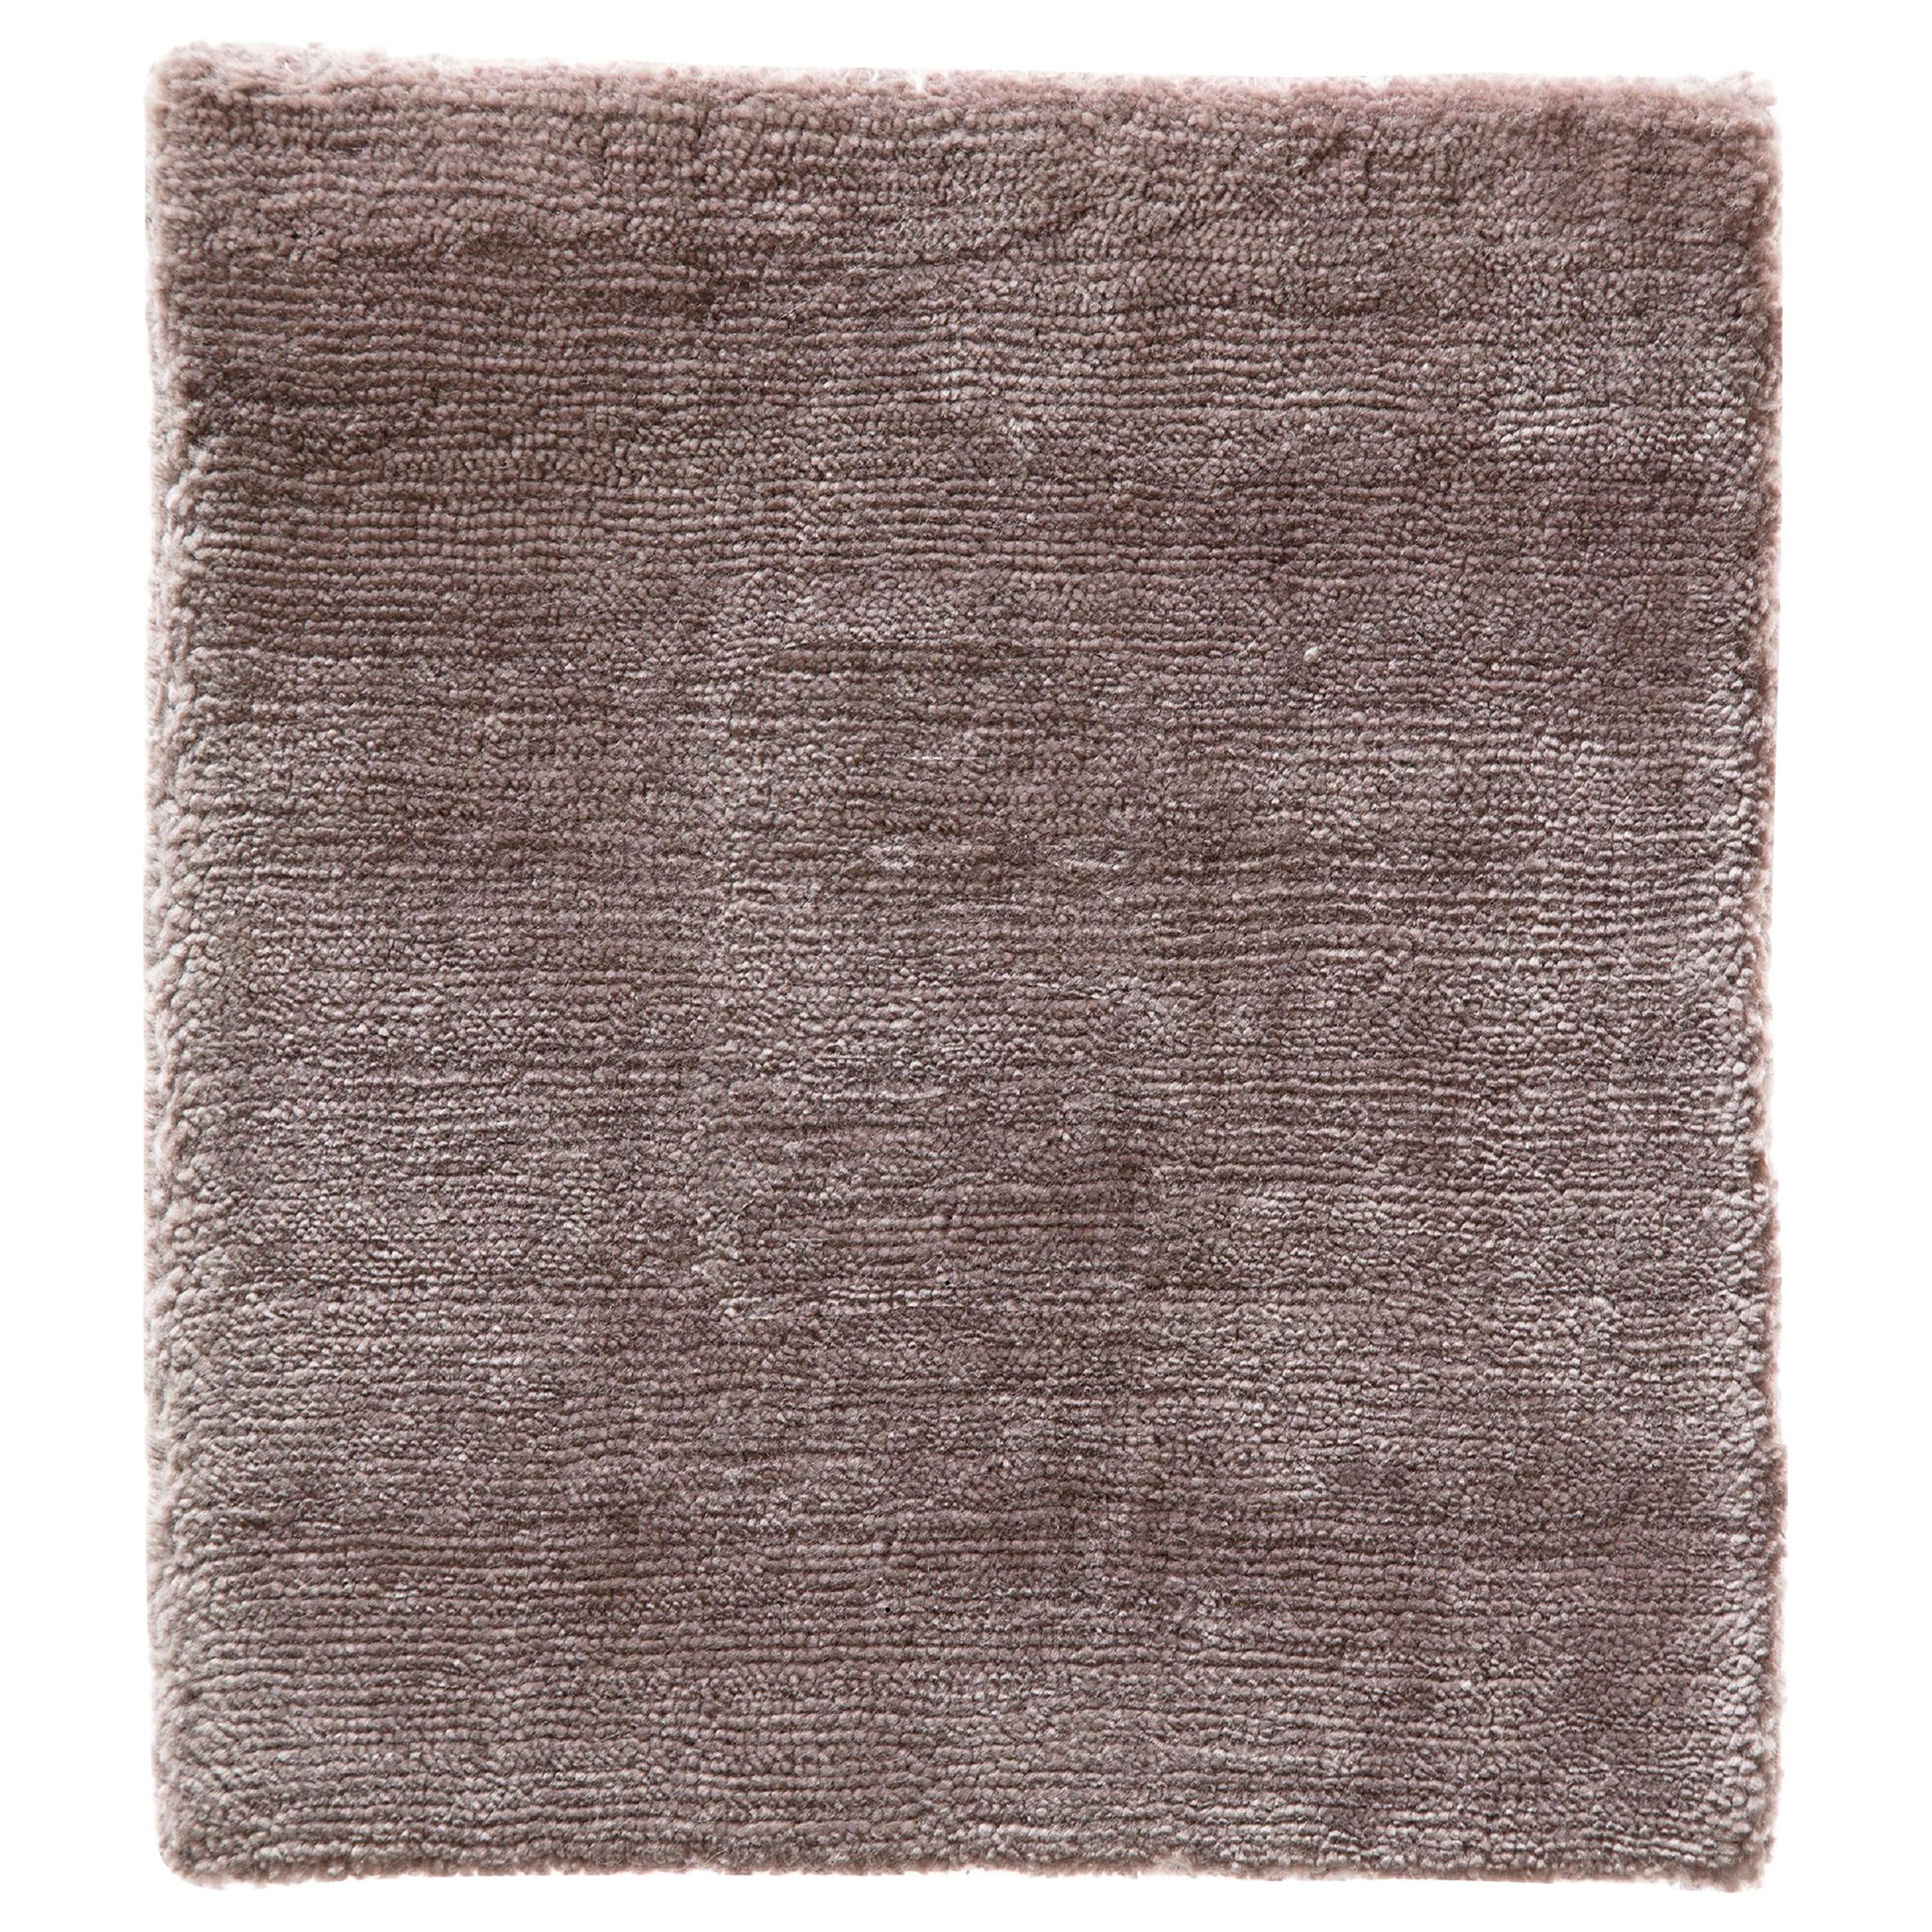 Modern Blush Rose Color Made in Bamboo Silk Rug Hand-Loomed with a Soft Feel